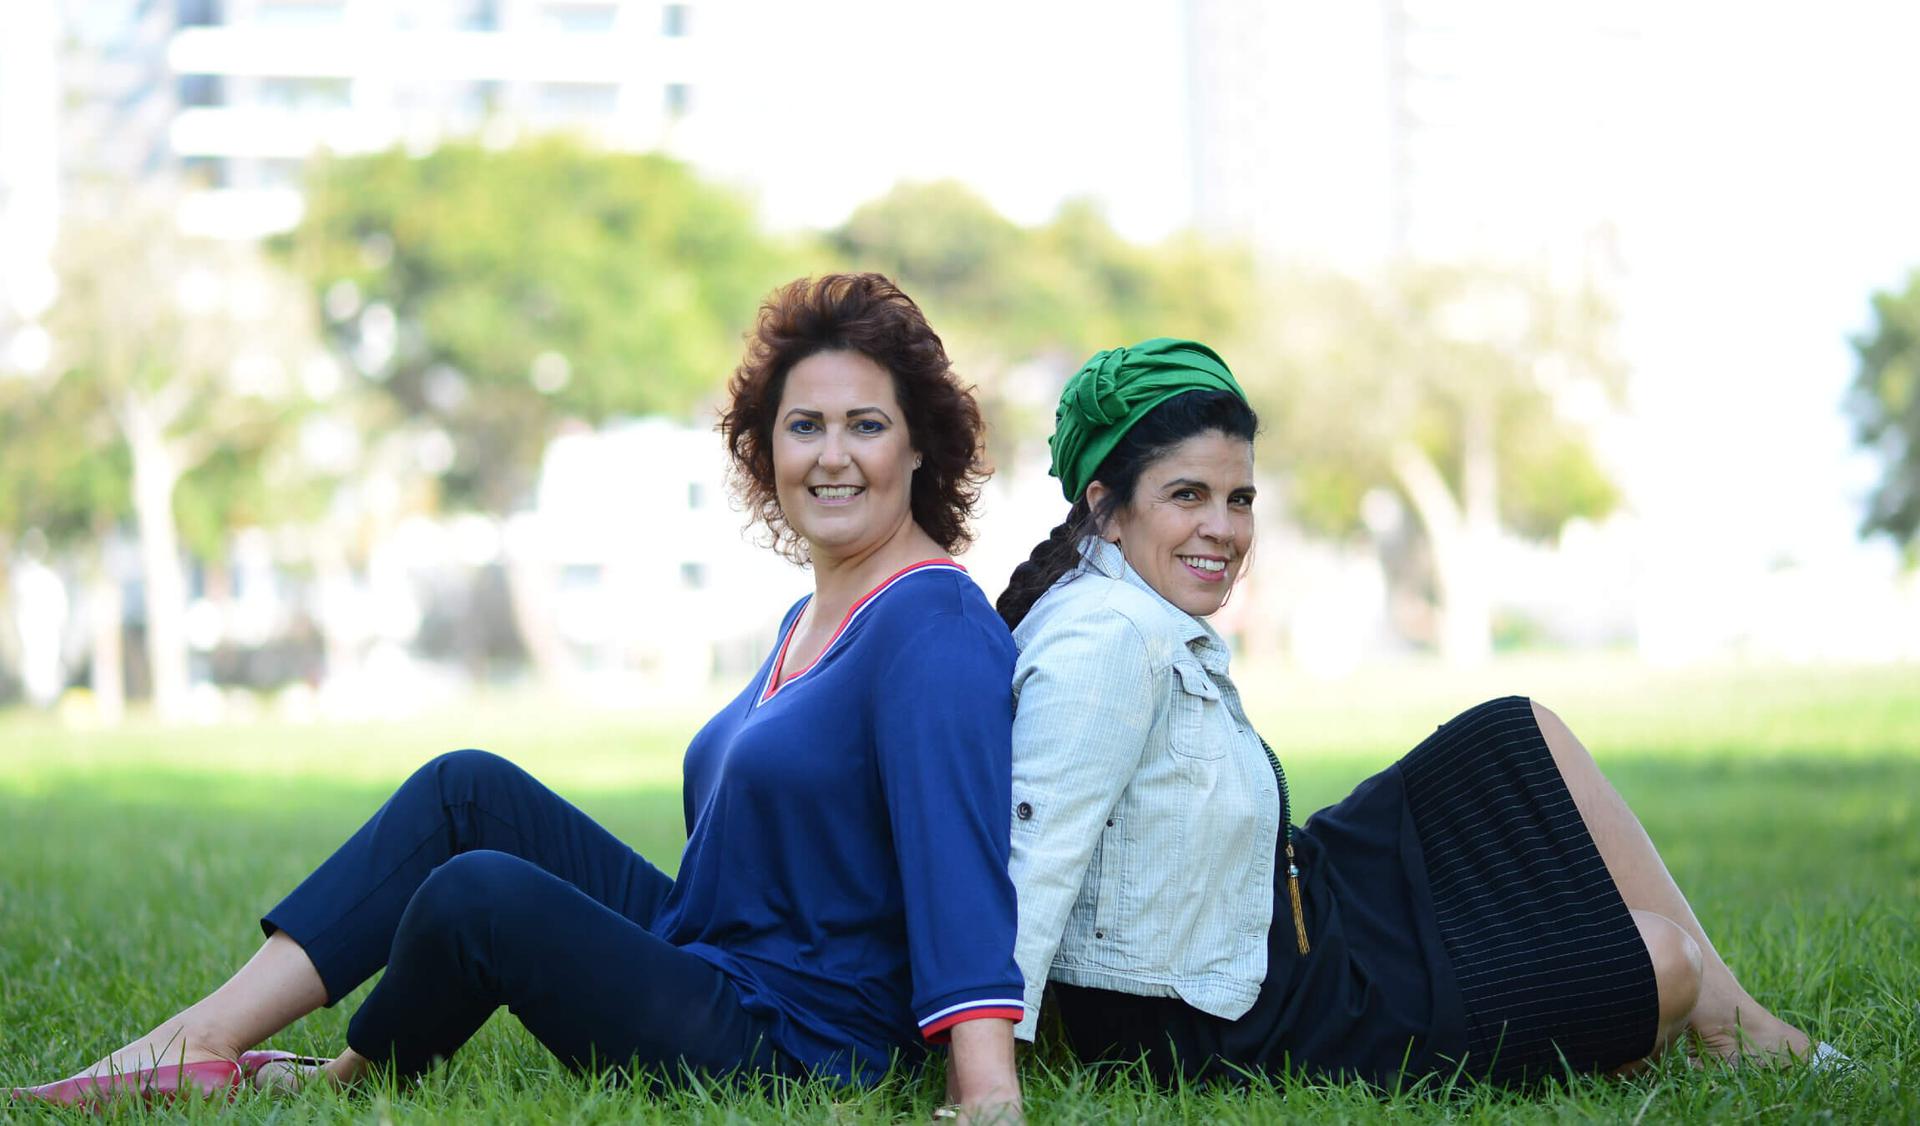 Limor Eisner, left, received a kidney from Evelyn Hazut, right, through an Israeli nonprofit. (Courtesy)